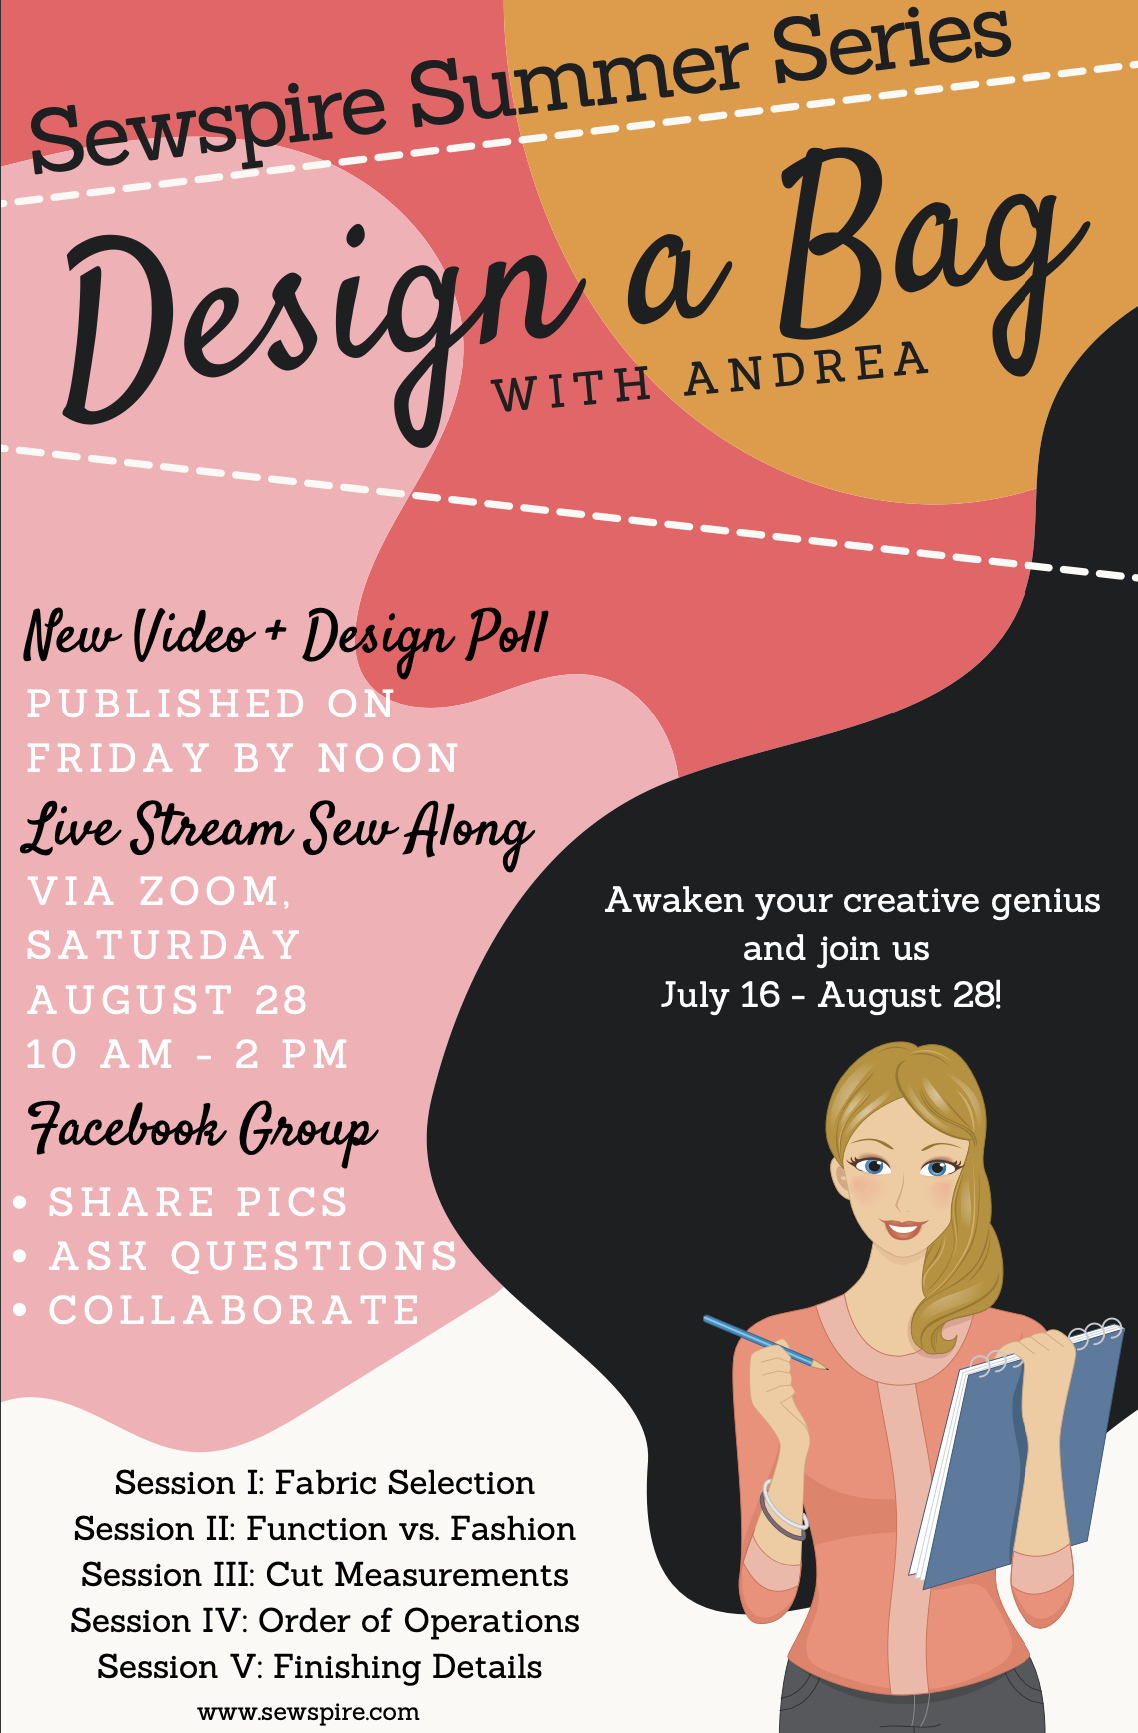 Sewspire Summer Series – DAB with Andrea!